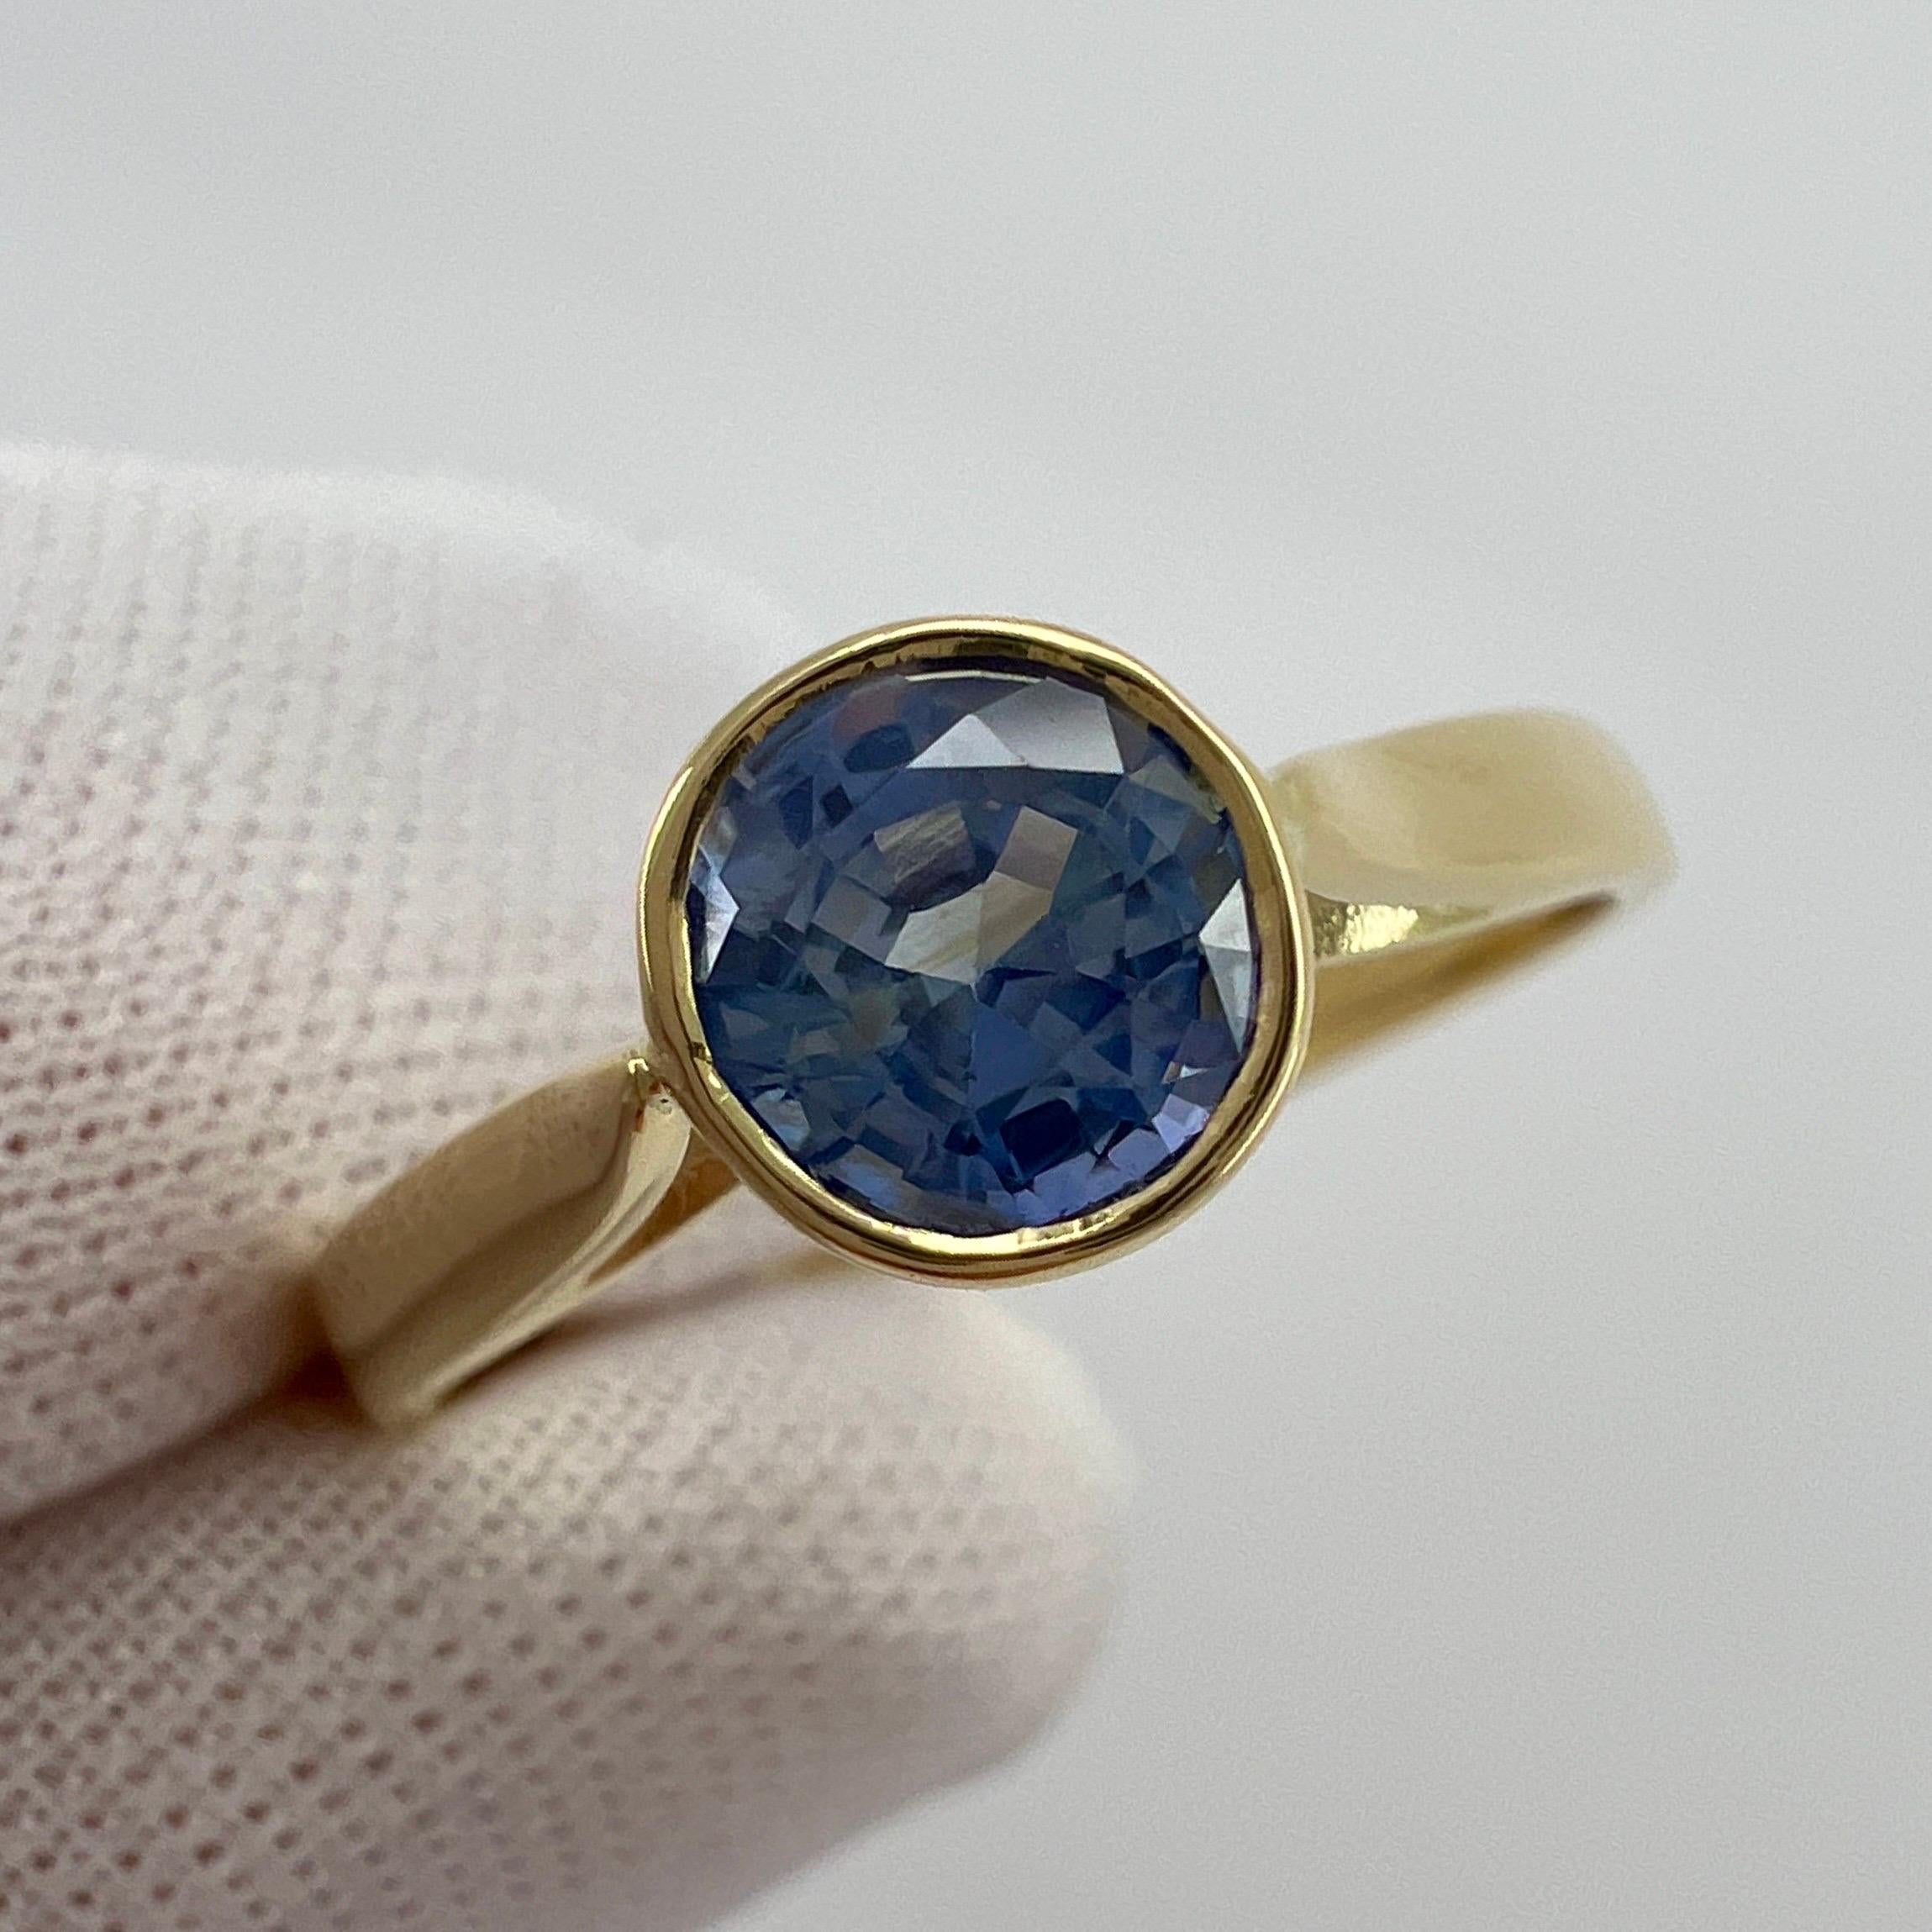 Vivid Light Blue Ceylon Sapphire Round Cut 18k Yellow Gold Solitaire Rubover Bezel Set Ring.

1.00 Carat sapphire with a stunning vivid light blue and good clarity. Clean stone with only some small natural inclusions visible when looking closely. No